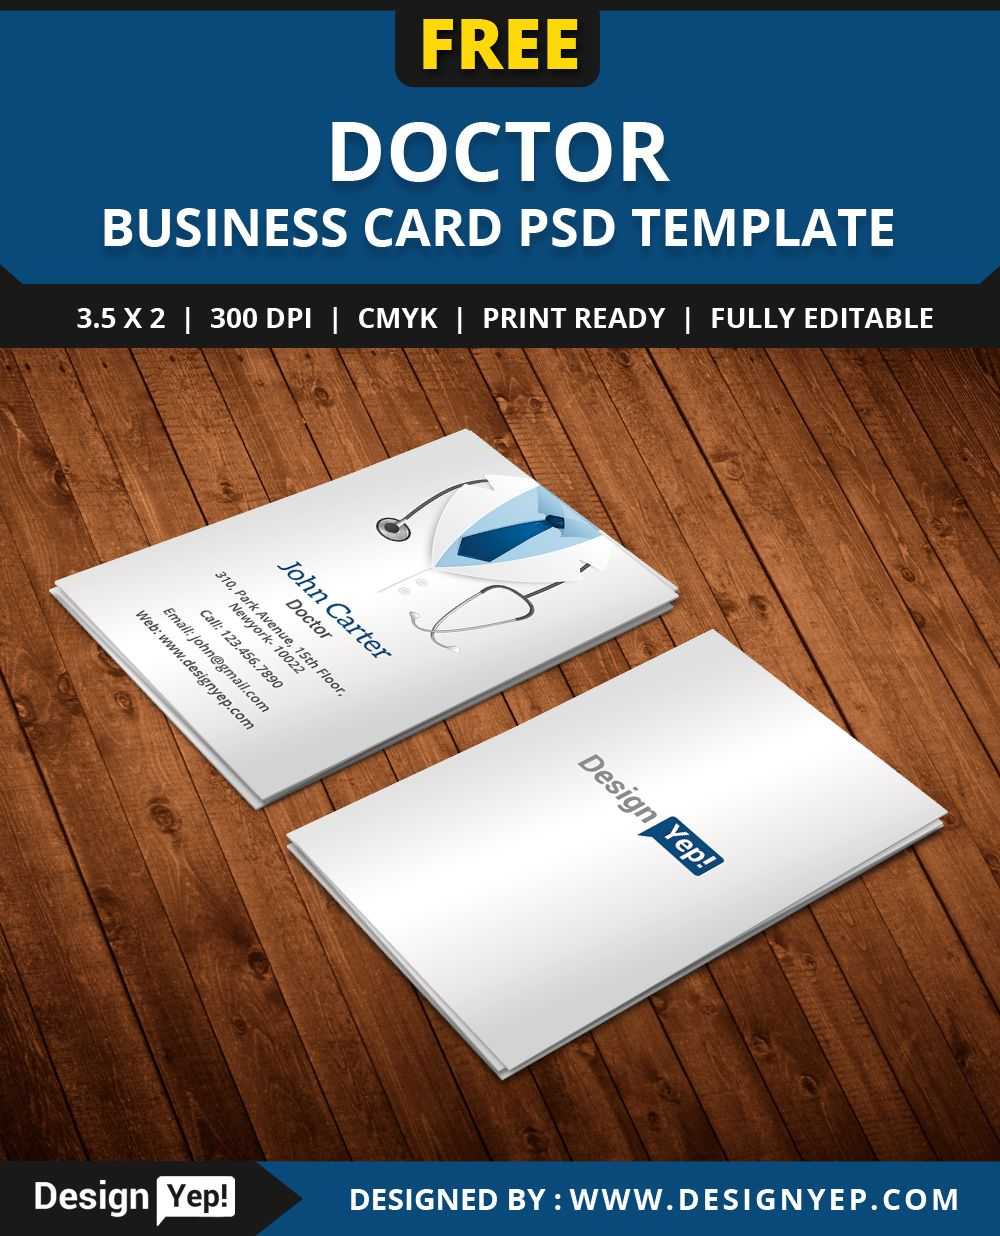 Free Doctor Business Card Template Psd | Free Business Card Pertaining To Name Card Design Template Psd